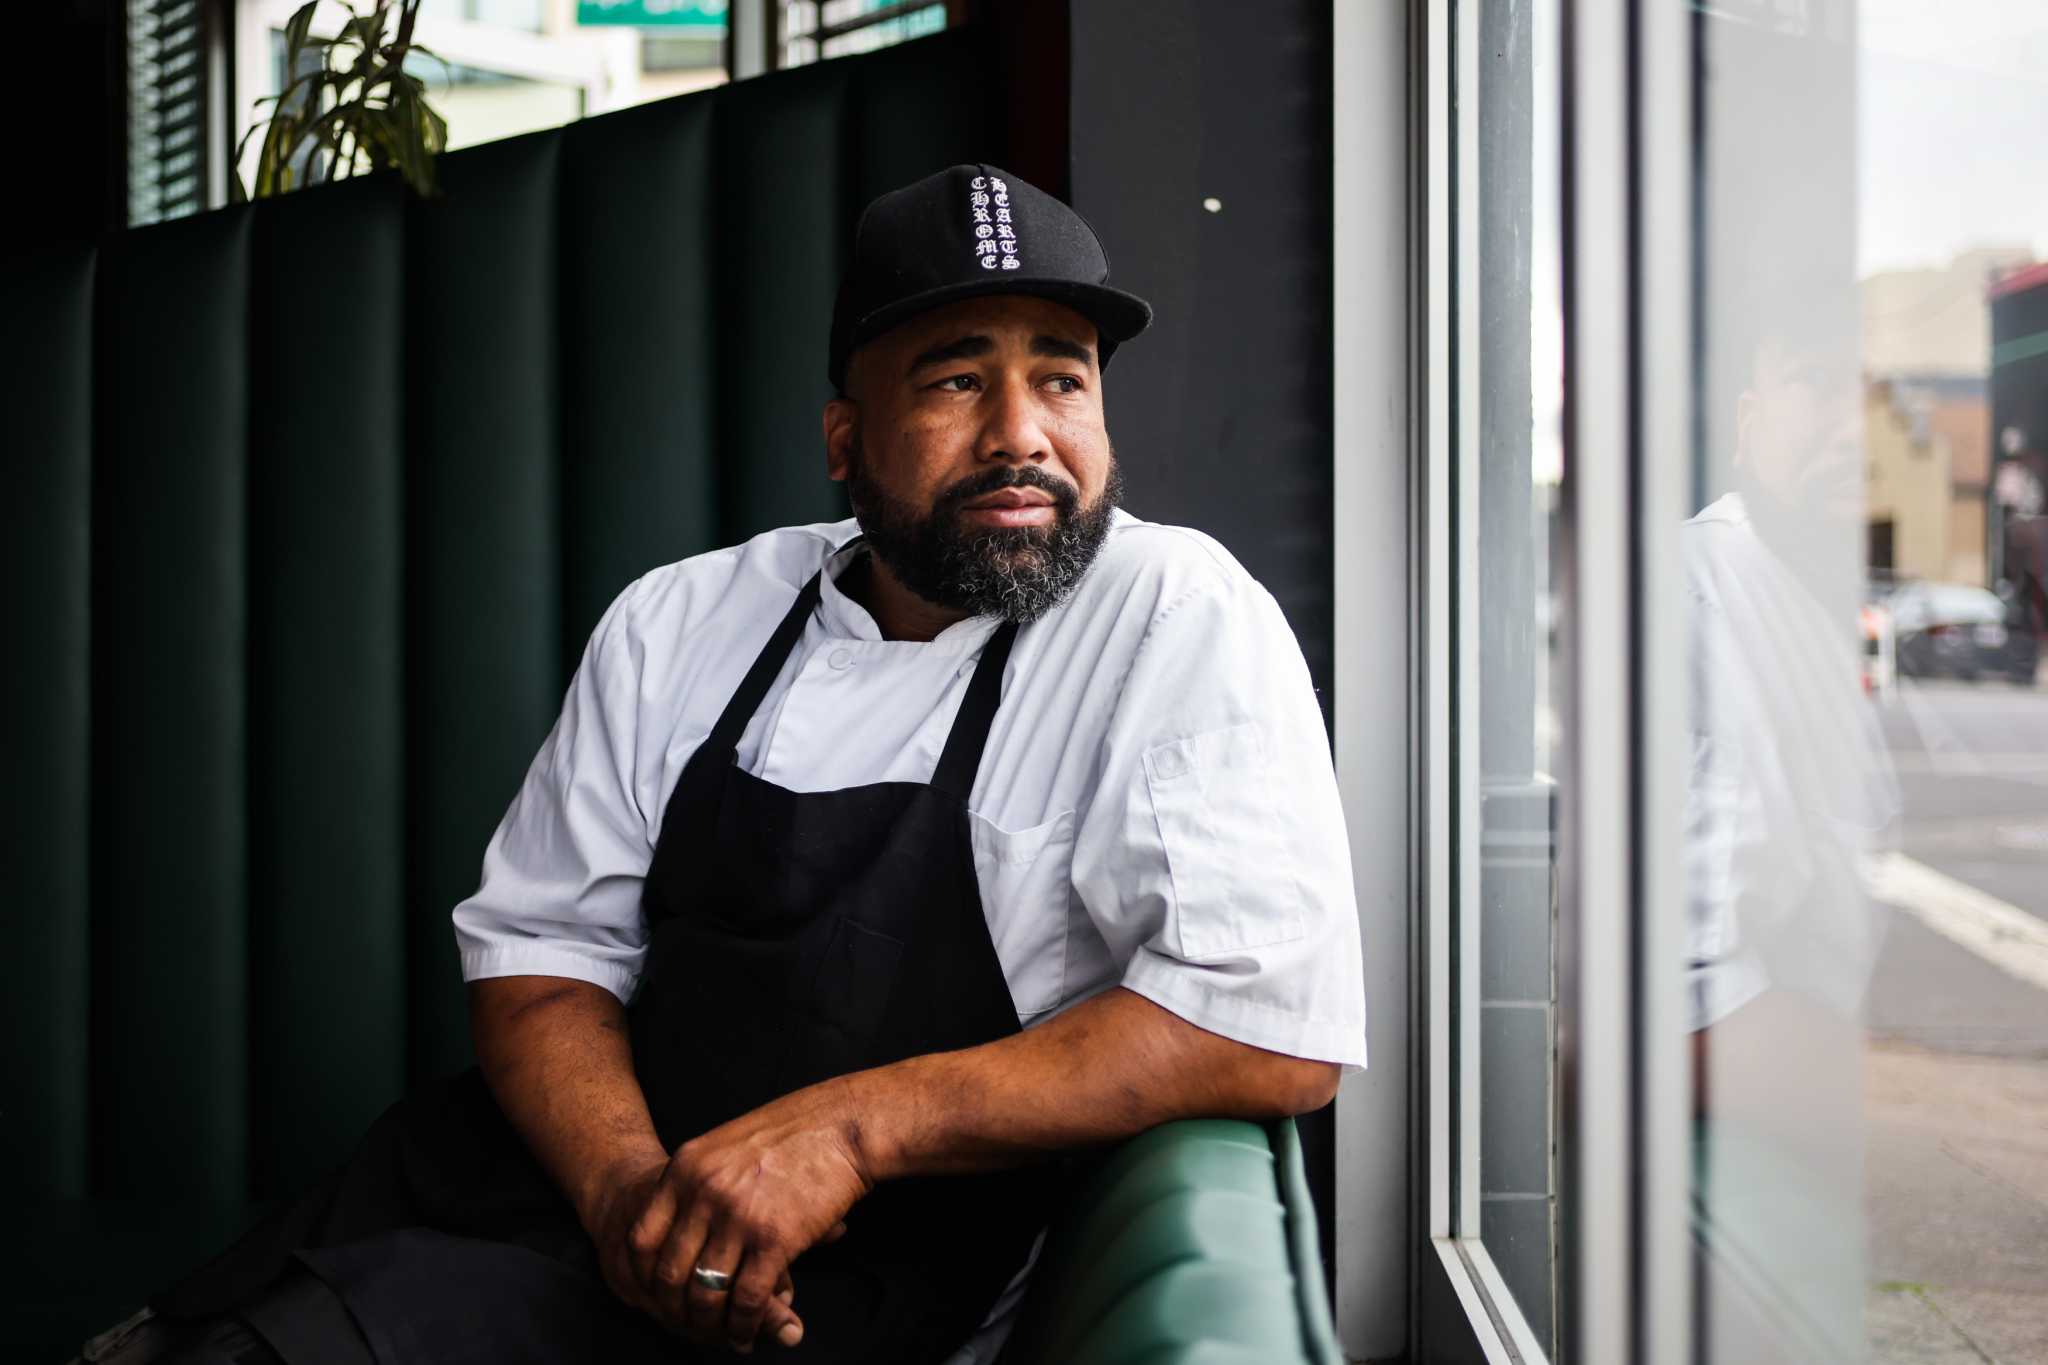 Chef Smelly is opening a soul foodstuff restaurant in Oakland